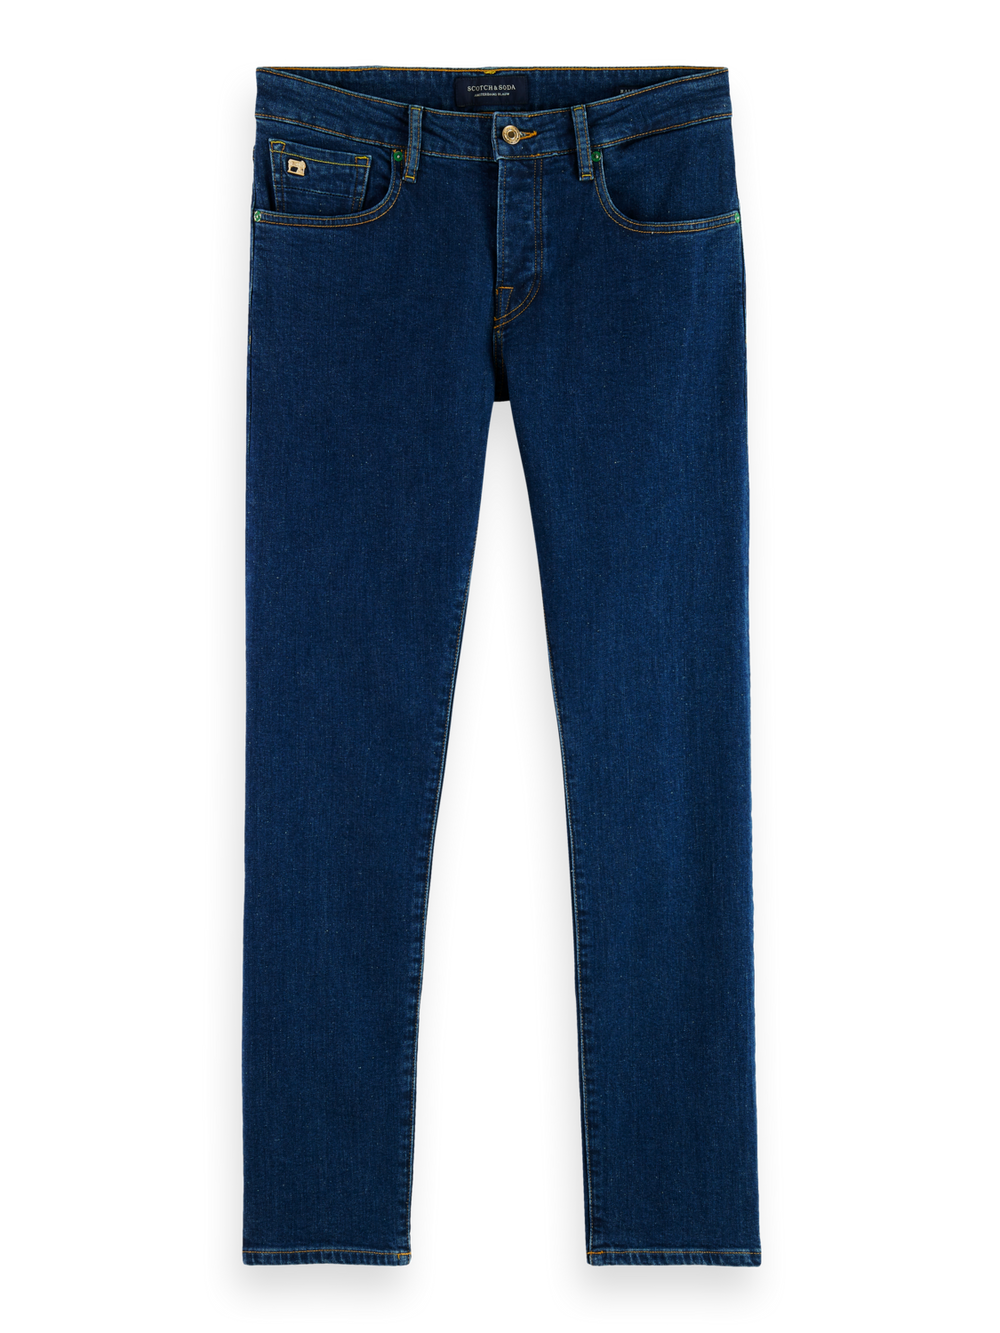 Ralston Enigma Blue Regular Slim Fit Jeans in Recycled Cotton | Buster McGee